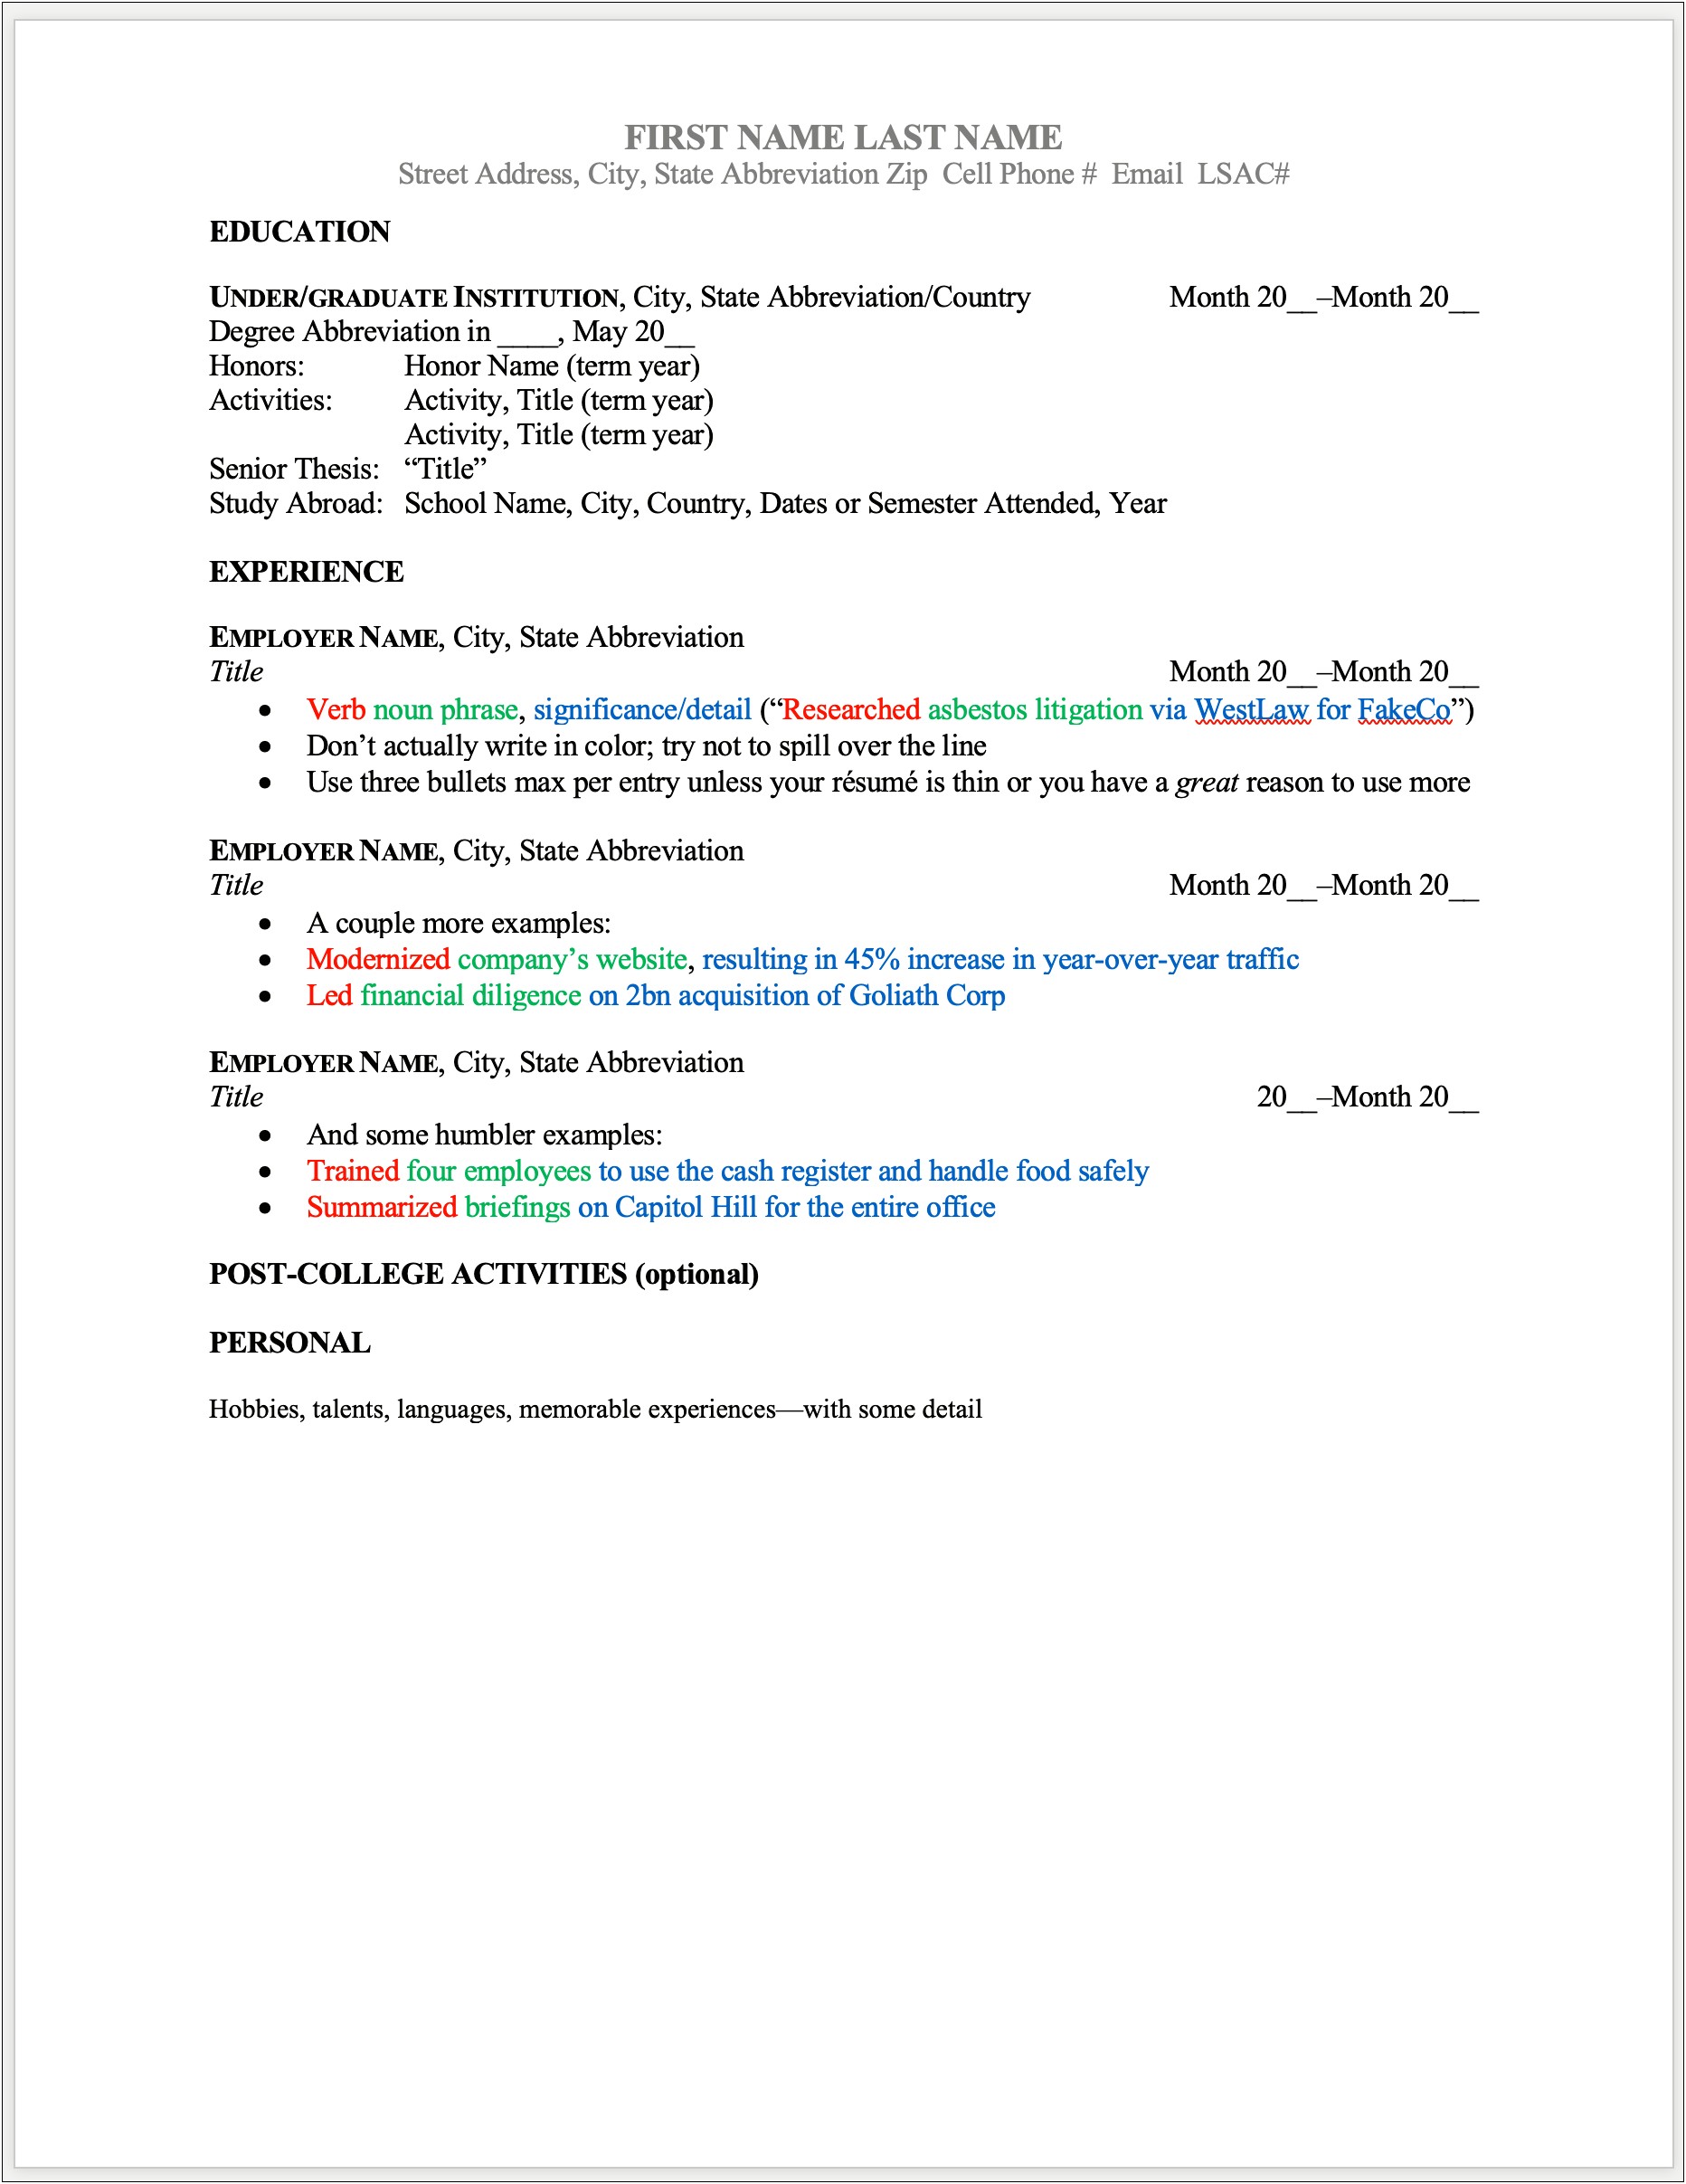 Resume Format For Survival Jobs In Canada